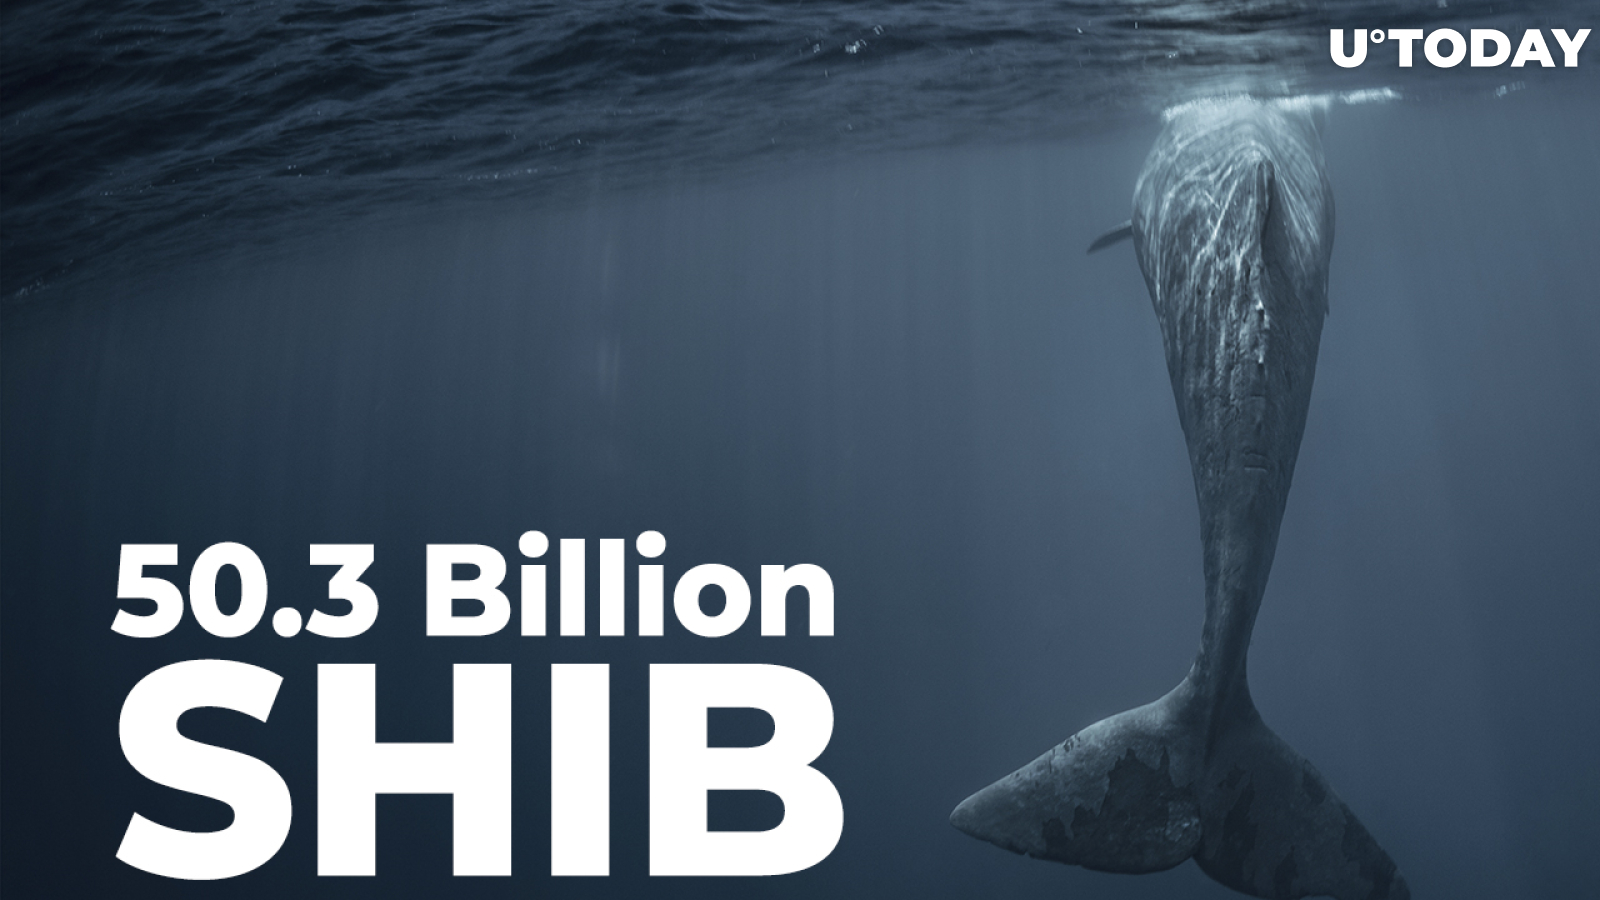 50.3 Billion SHIB Bought by This Whale as SHIB Becomes Most Used Smart Contract